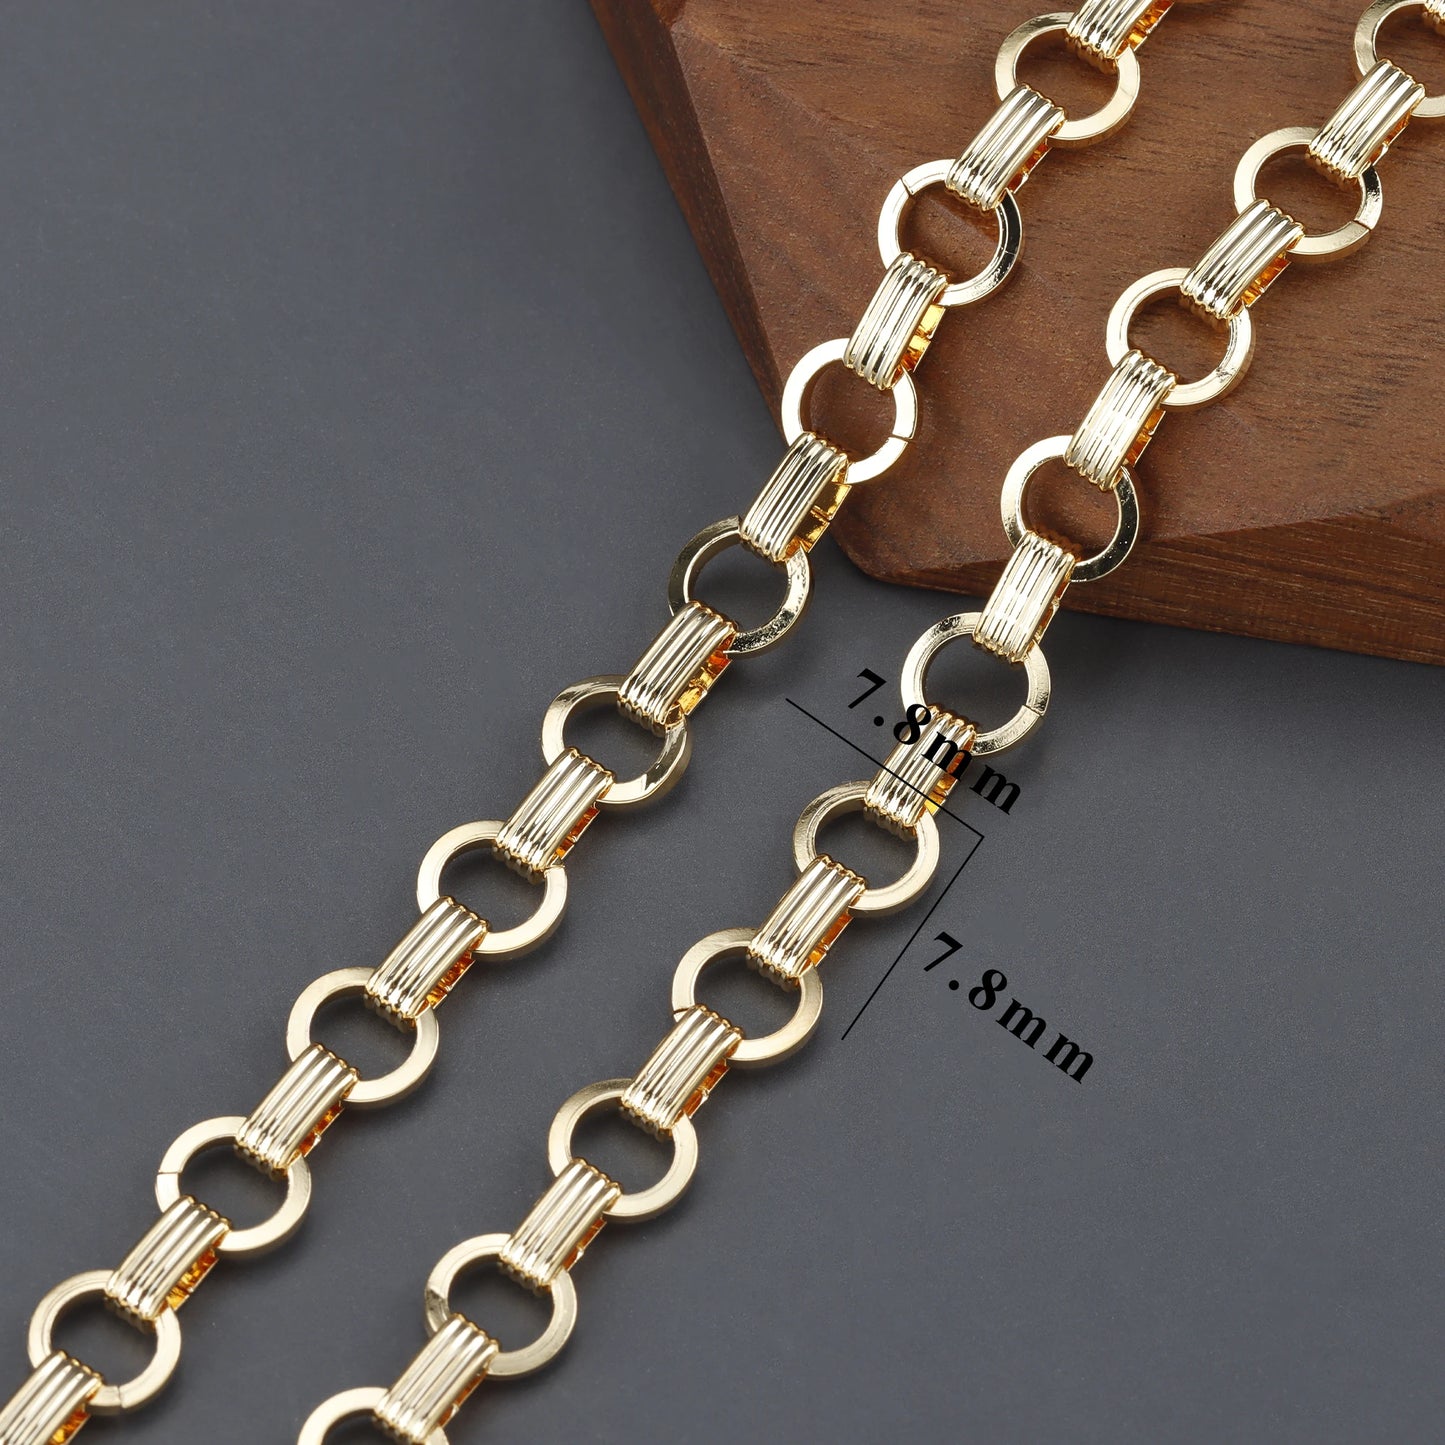 GUFEATHER C146,diy chain,pass REACH,nickel free,18k gold rhodium plated,copper metal,diy bracelet necklace,jewelry making,1m/lot